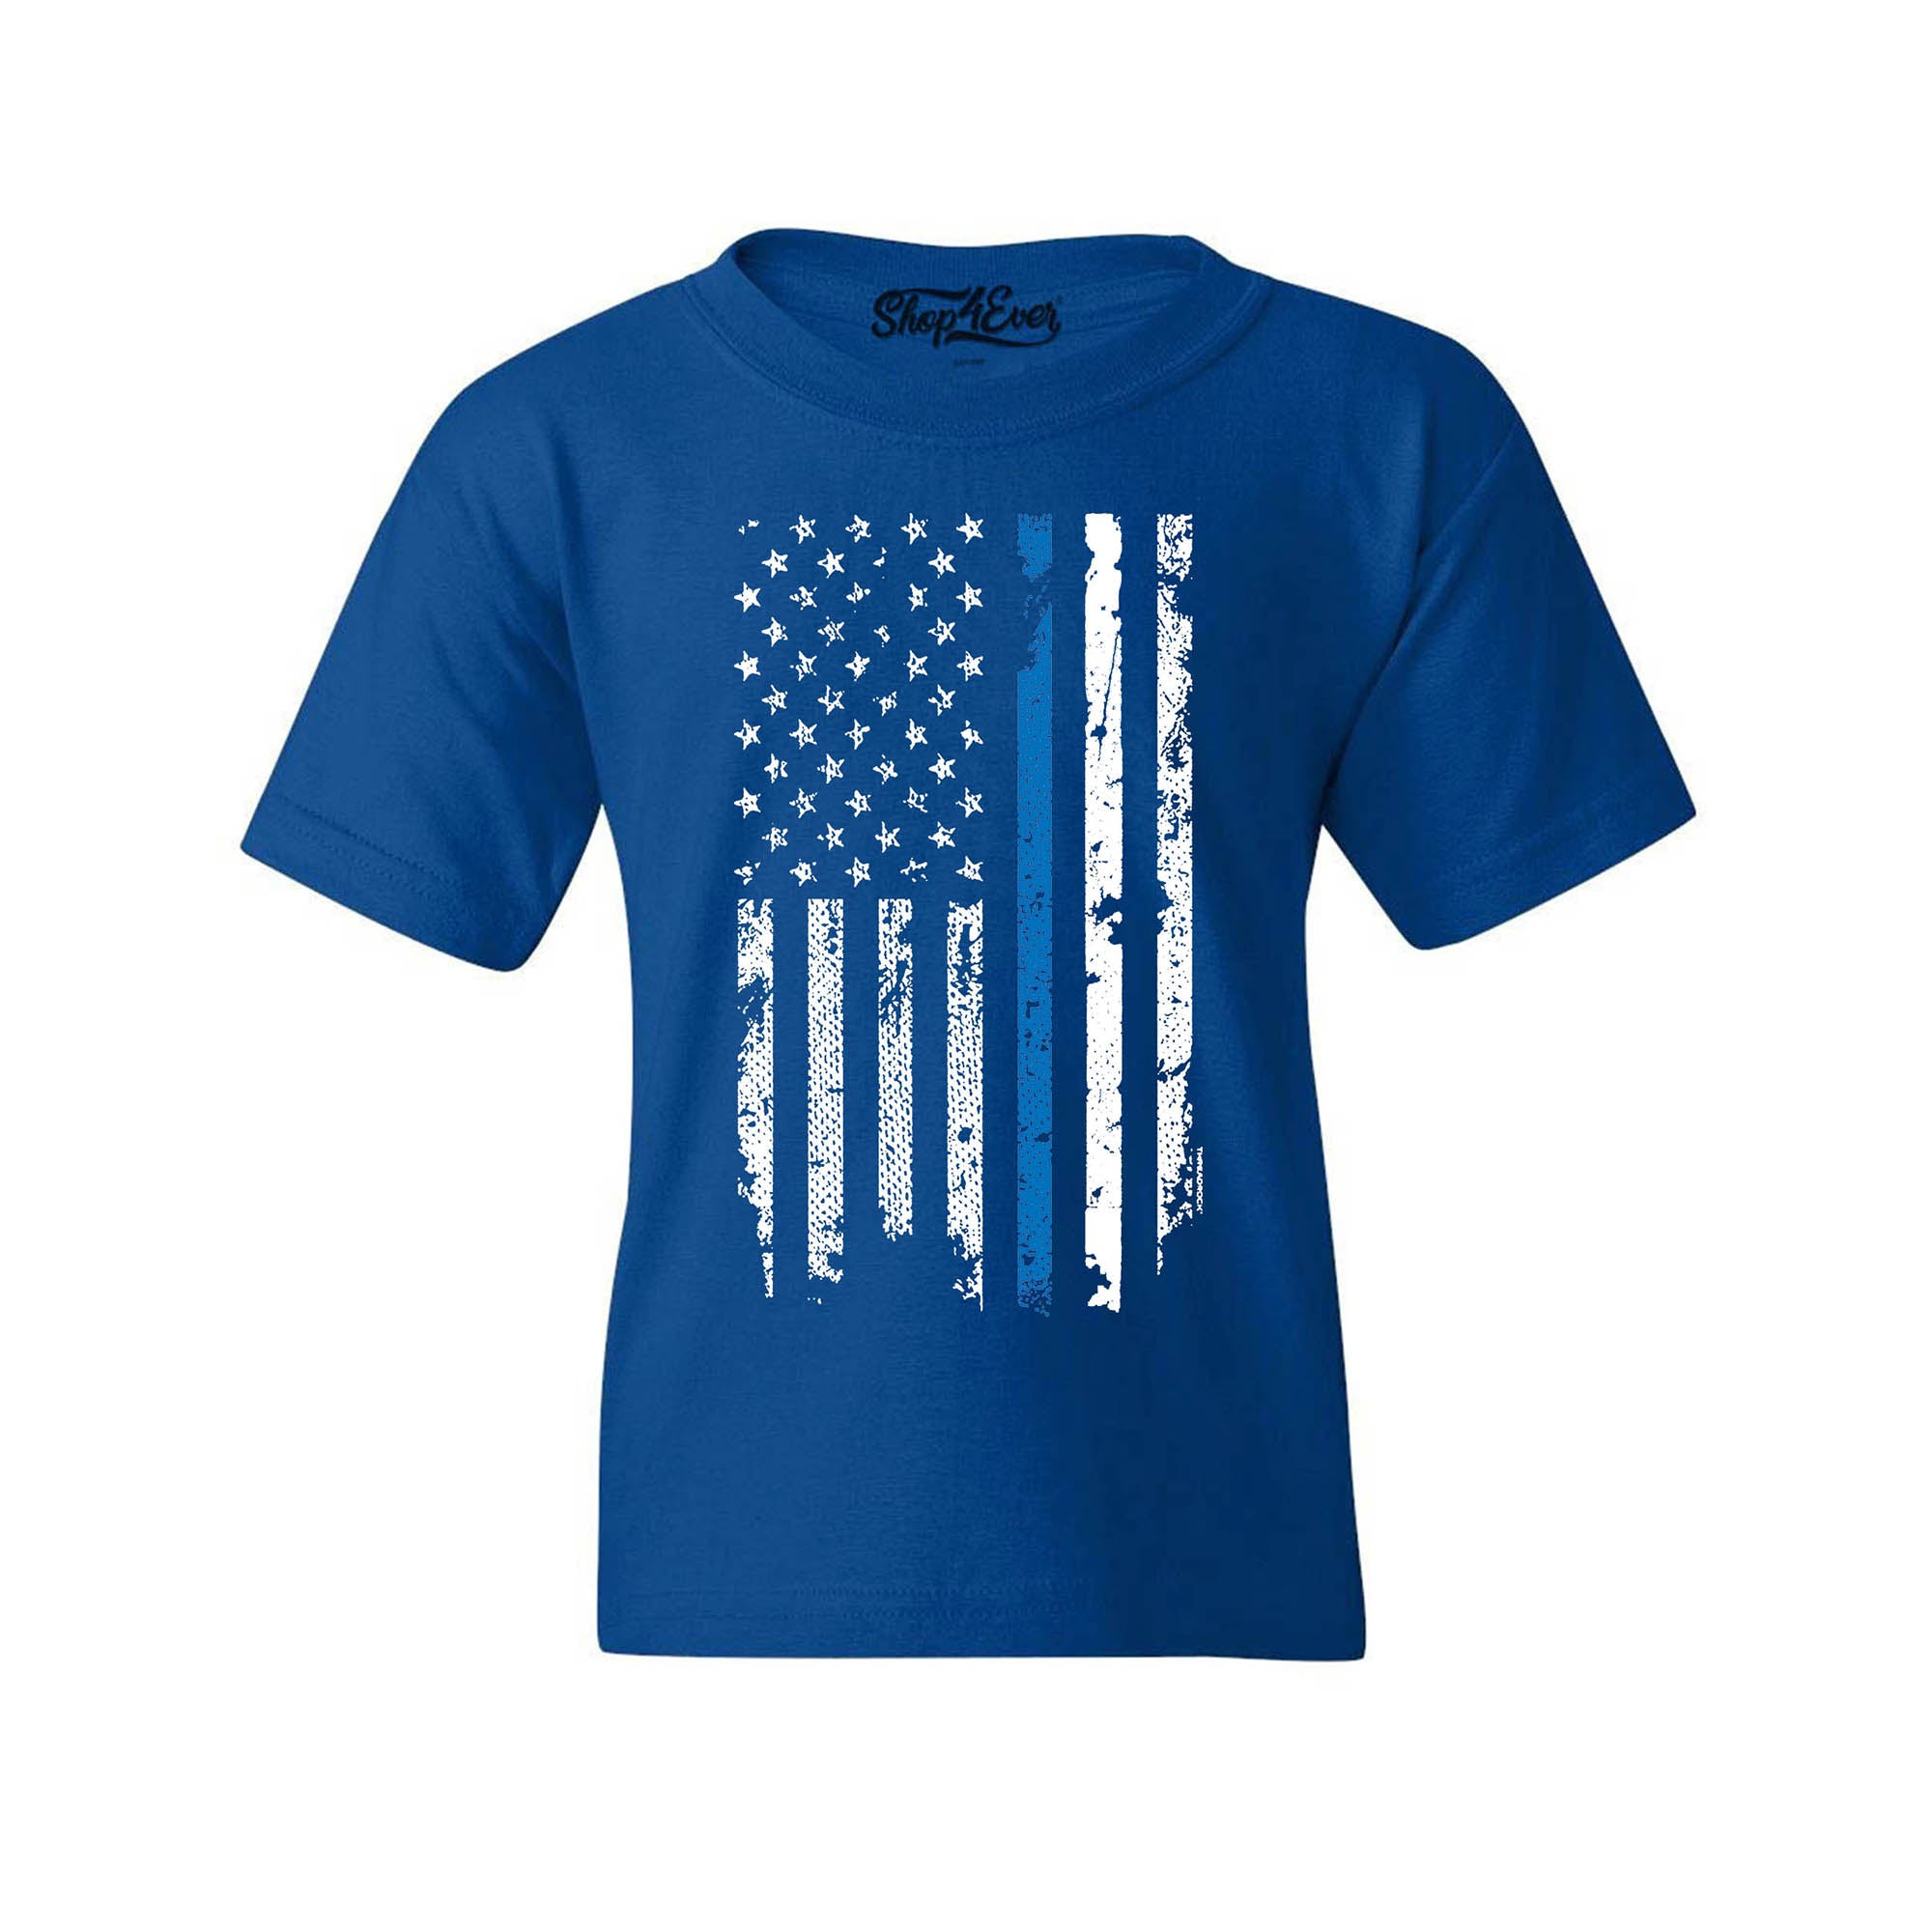 Police Officer American Flag Blue Line USA Law Enforcement Youth's T-Shirt